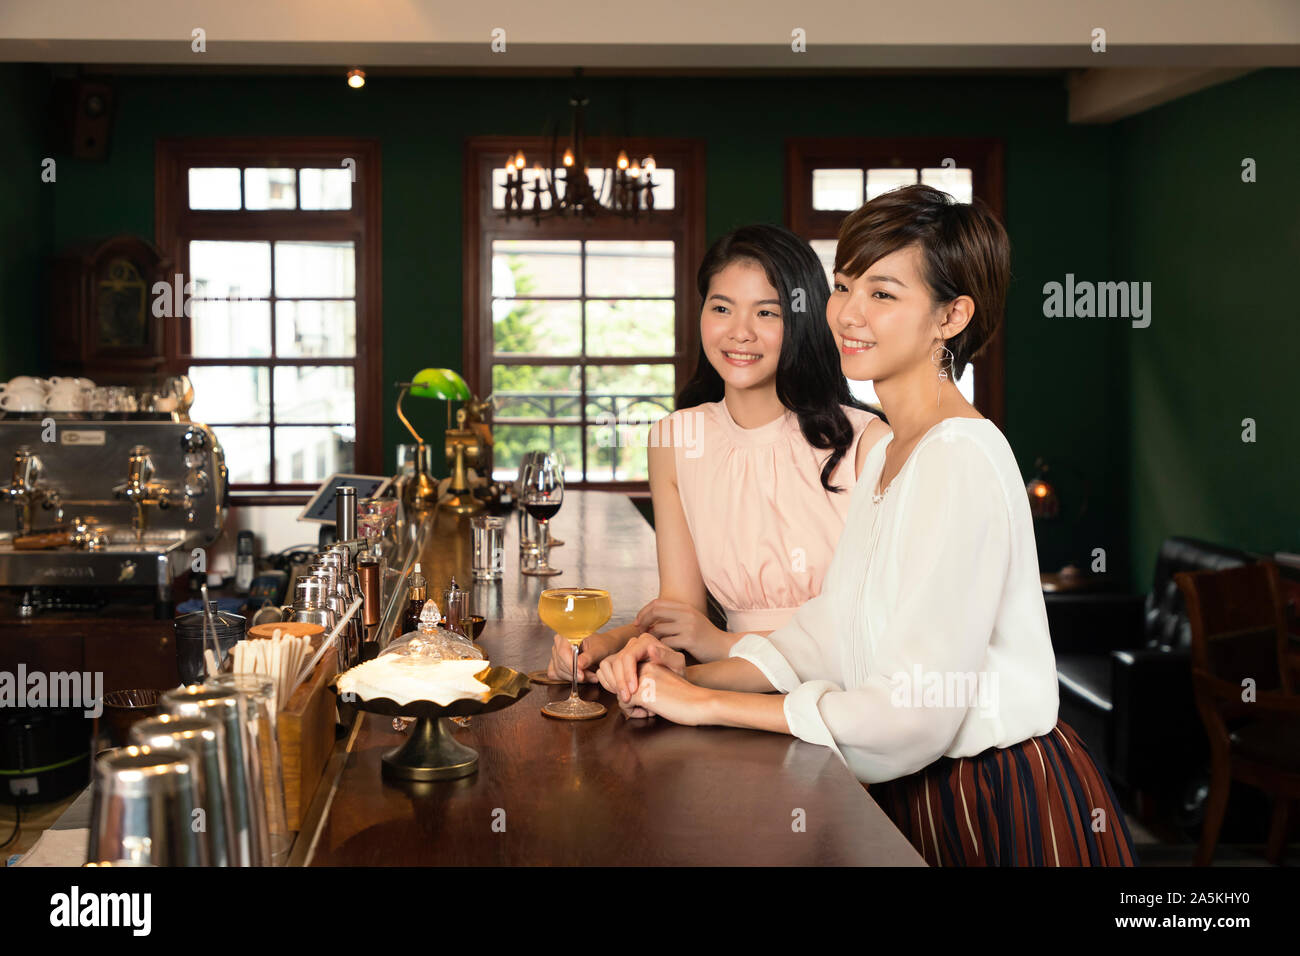 Two smiling young women at bar counter Stock Photo